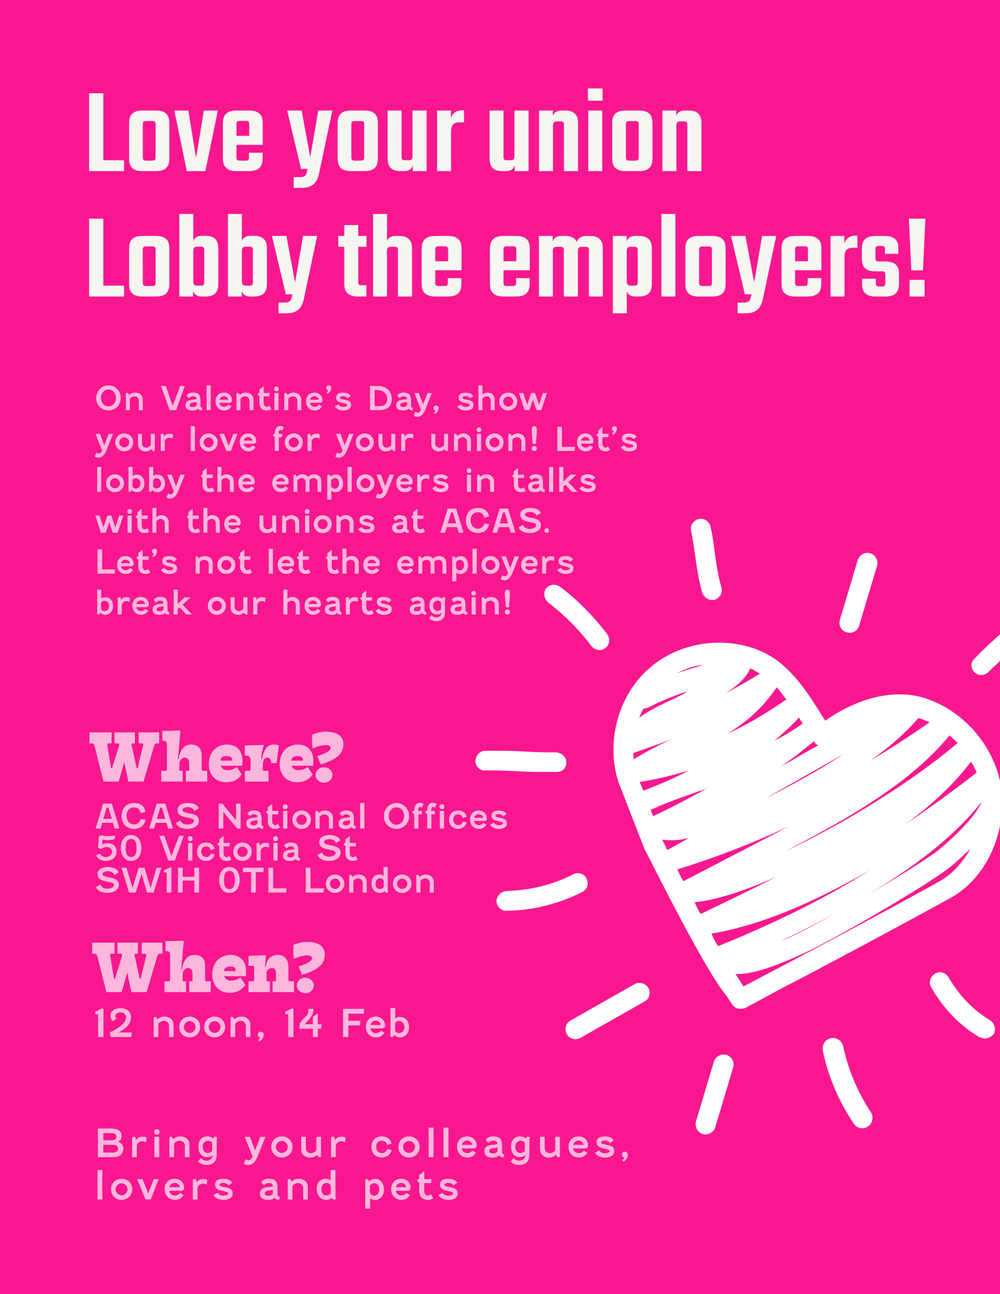 Love your union - Lobby the employers!